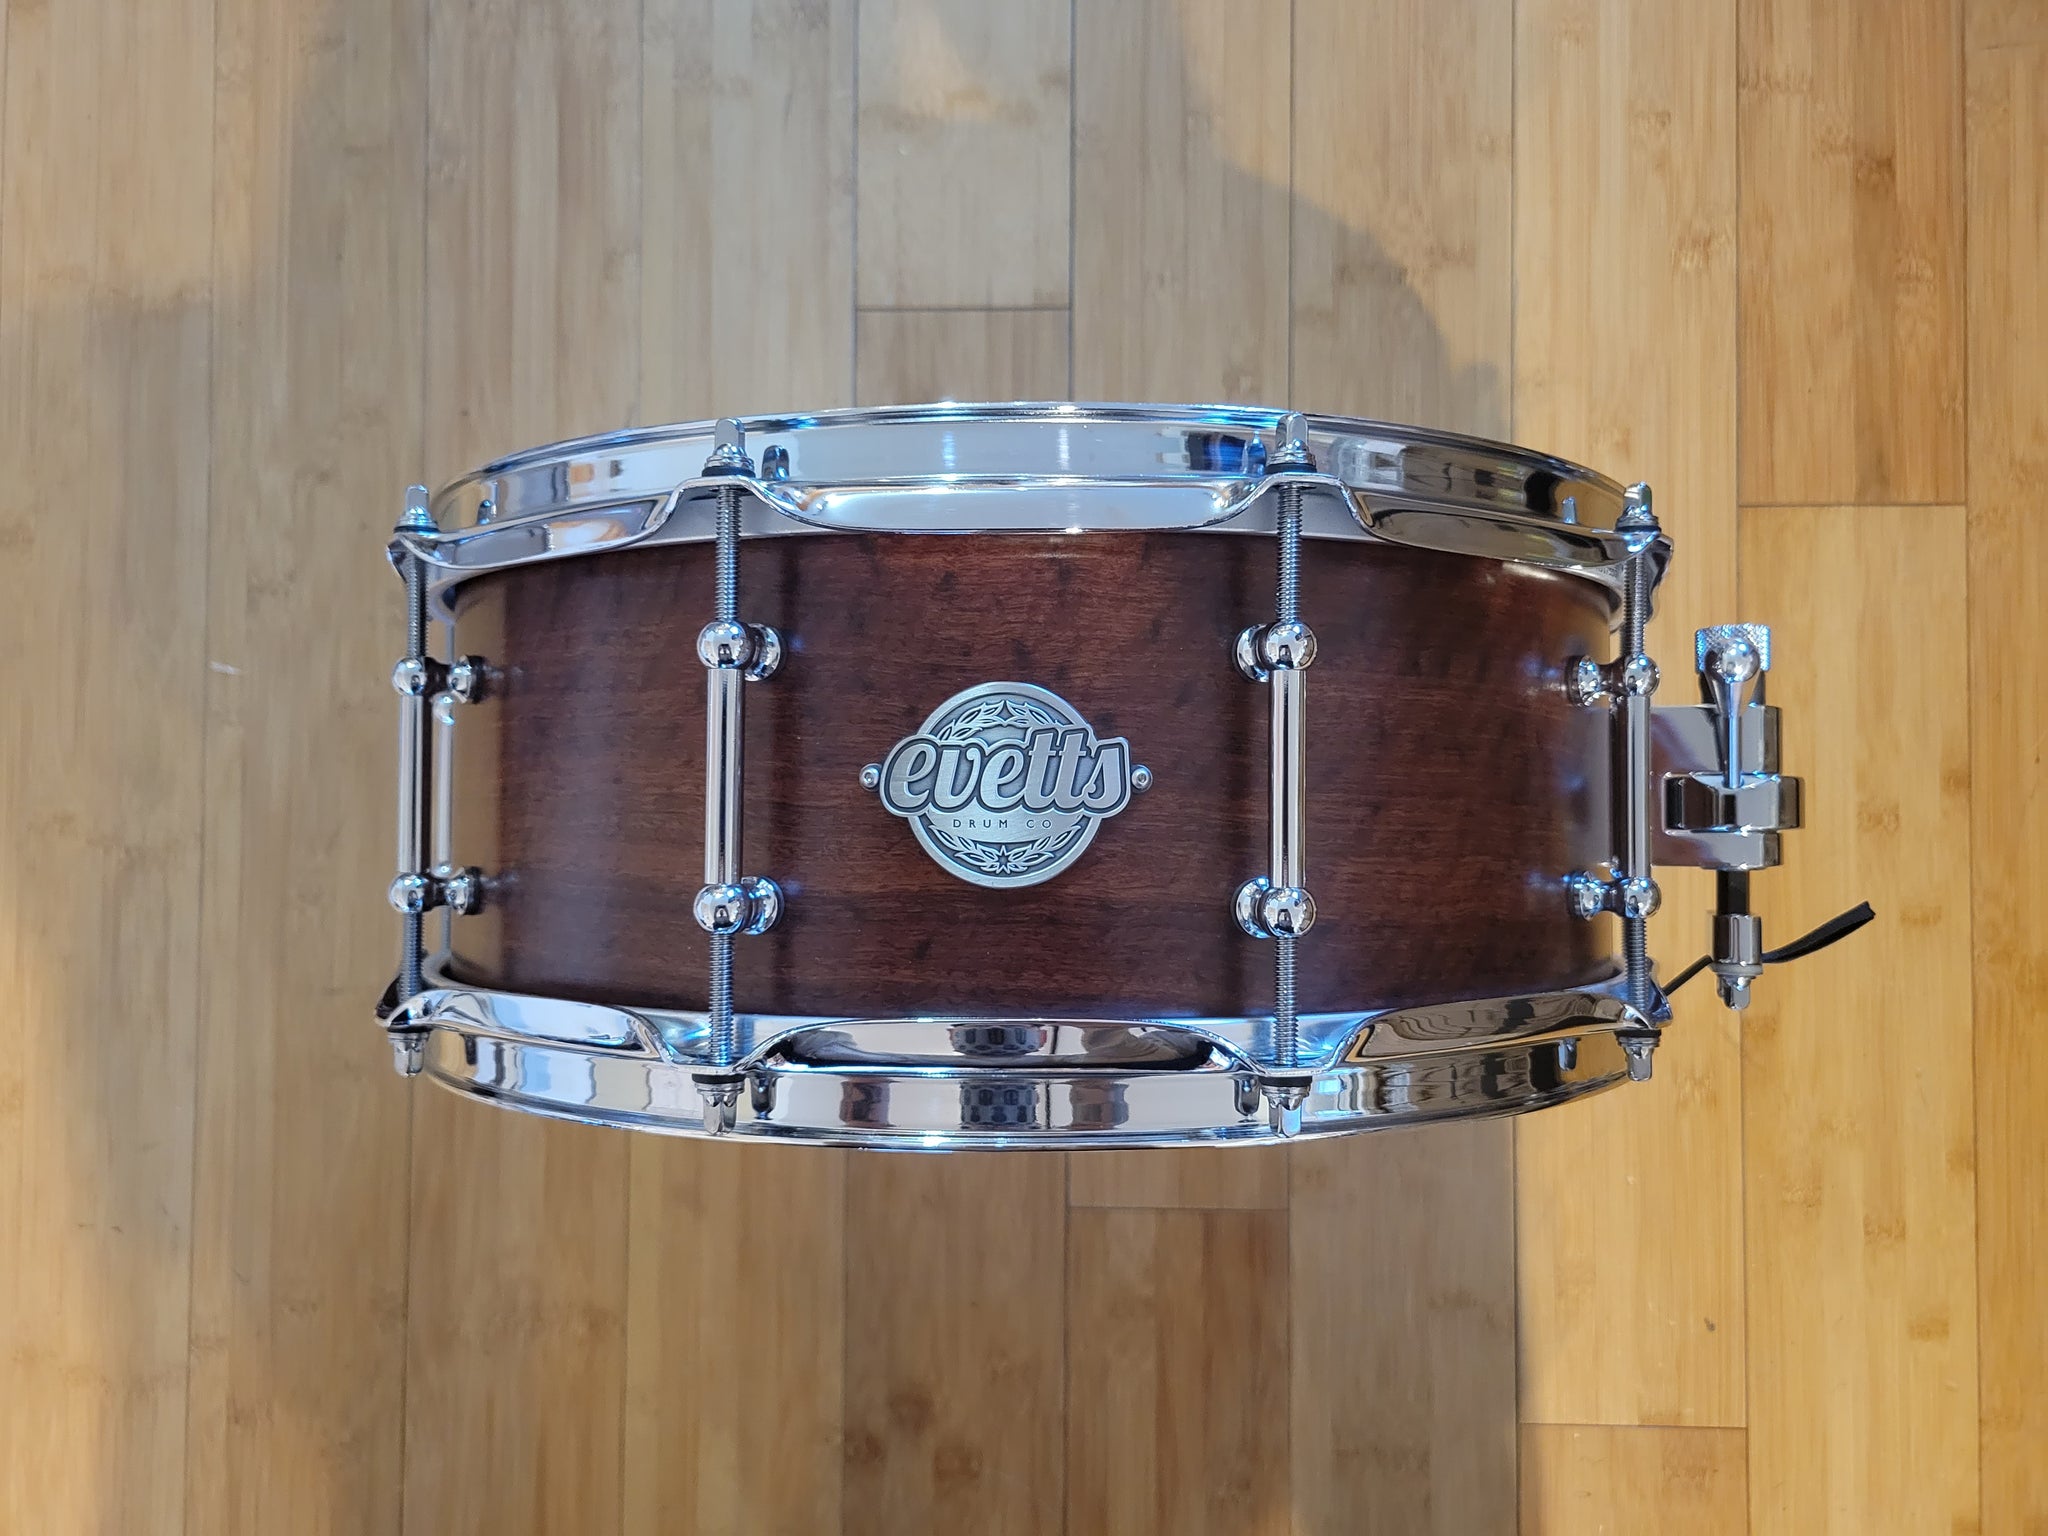 Snares - Evetts Drums 5.5x14 Jarrah Ply Snare Drum (Smooth Satin)